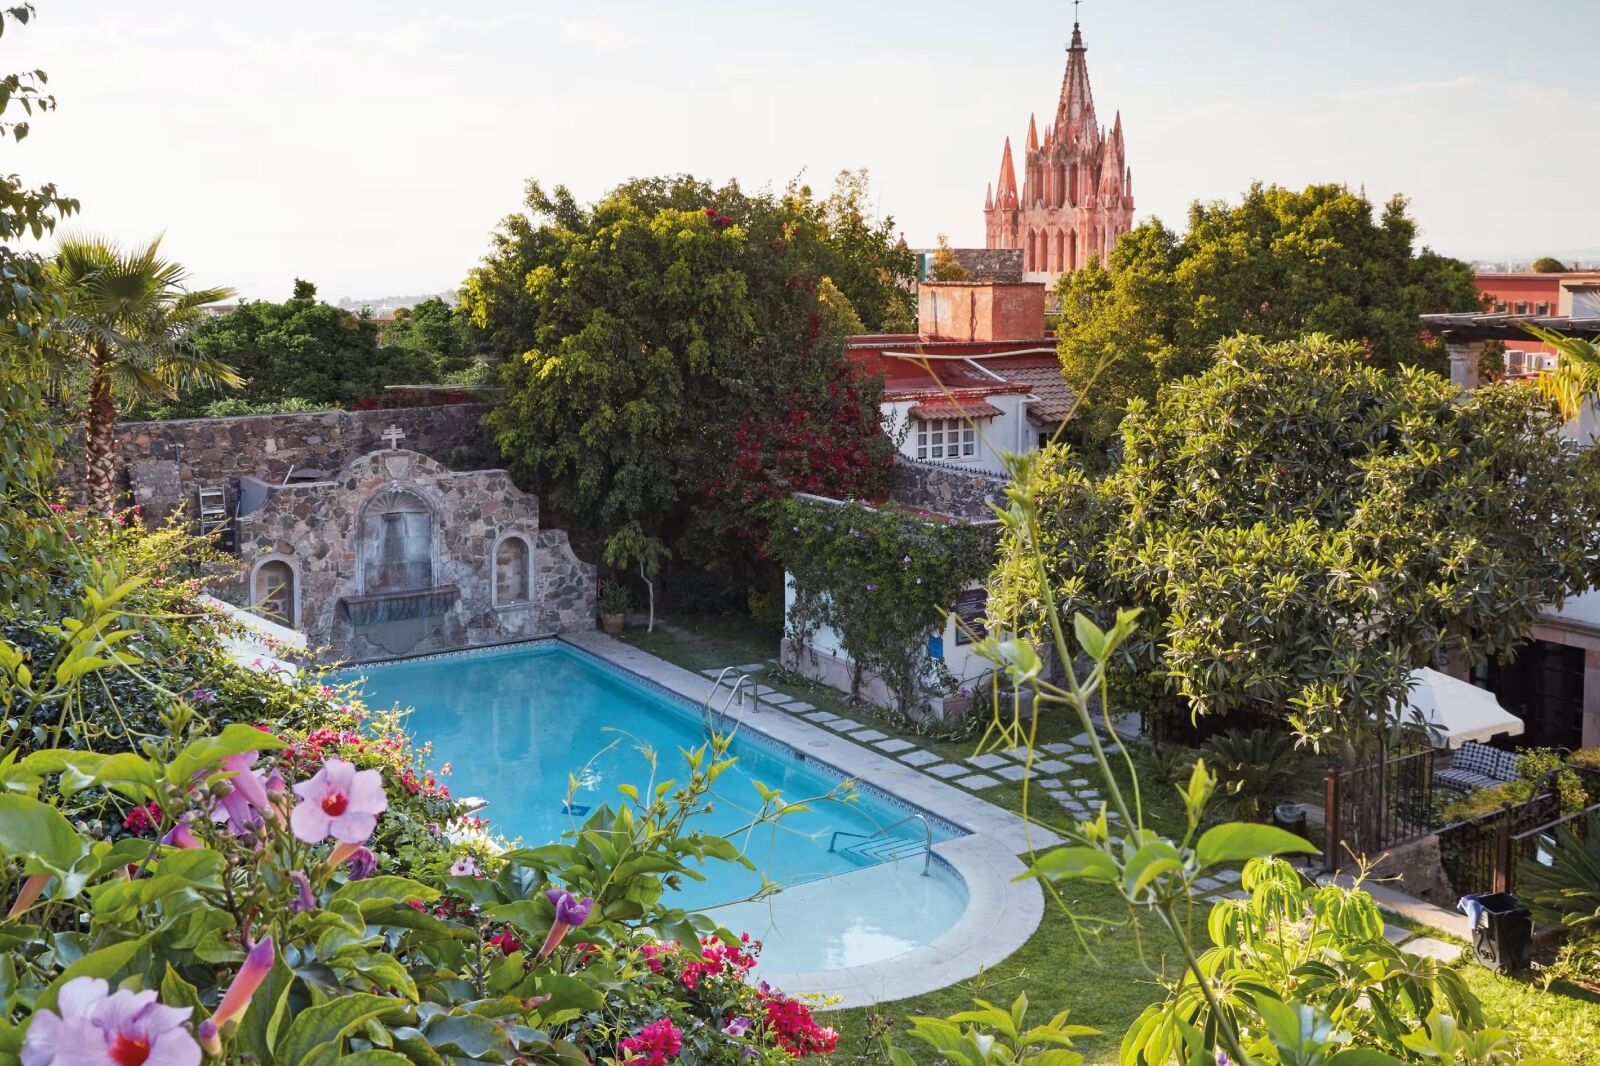 Belmond Casa de Sierra Nevada swimming pool and gardens one of the best places for couples in Mexico